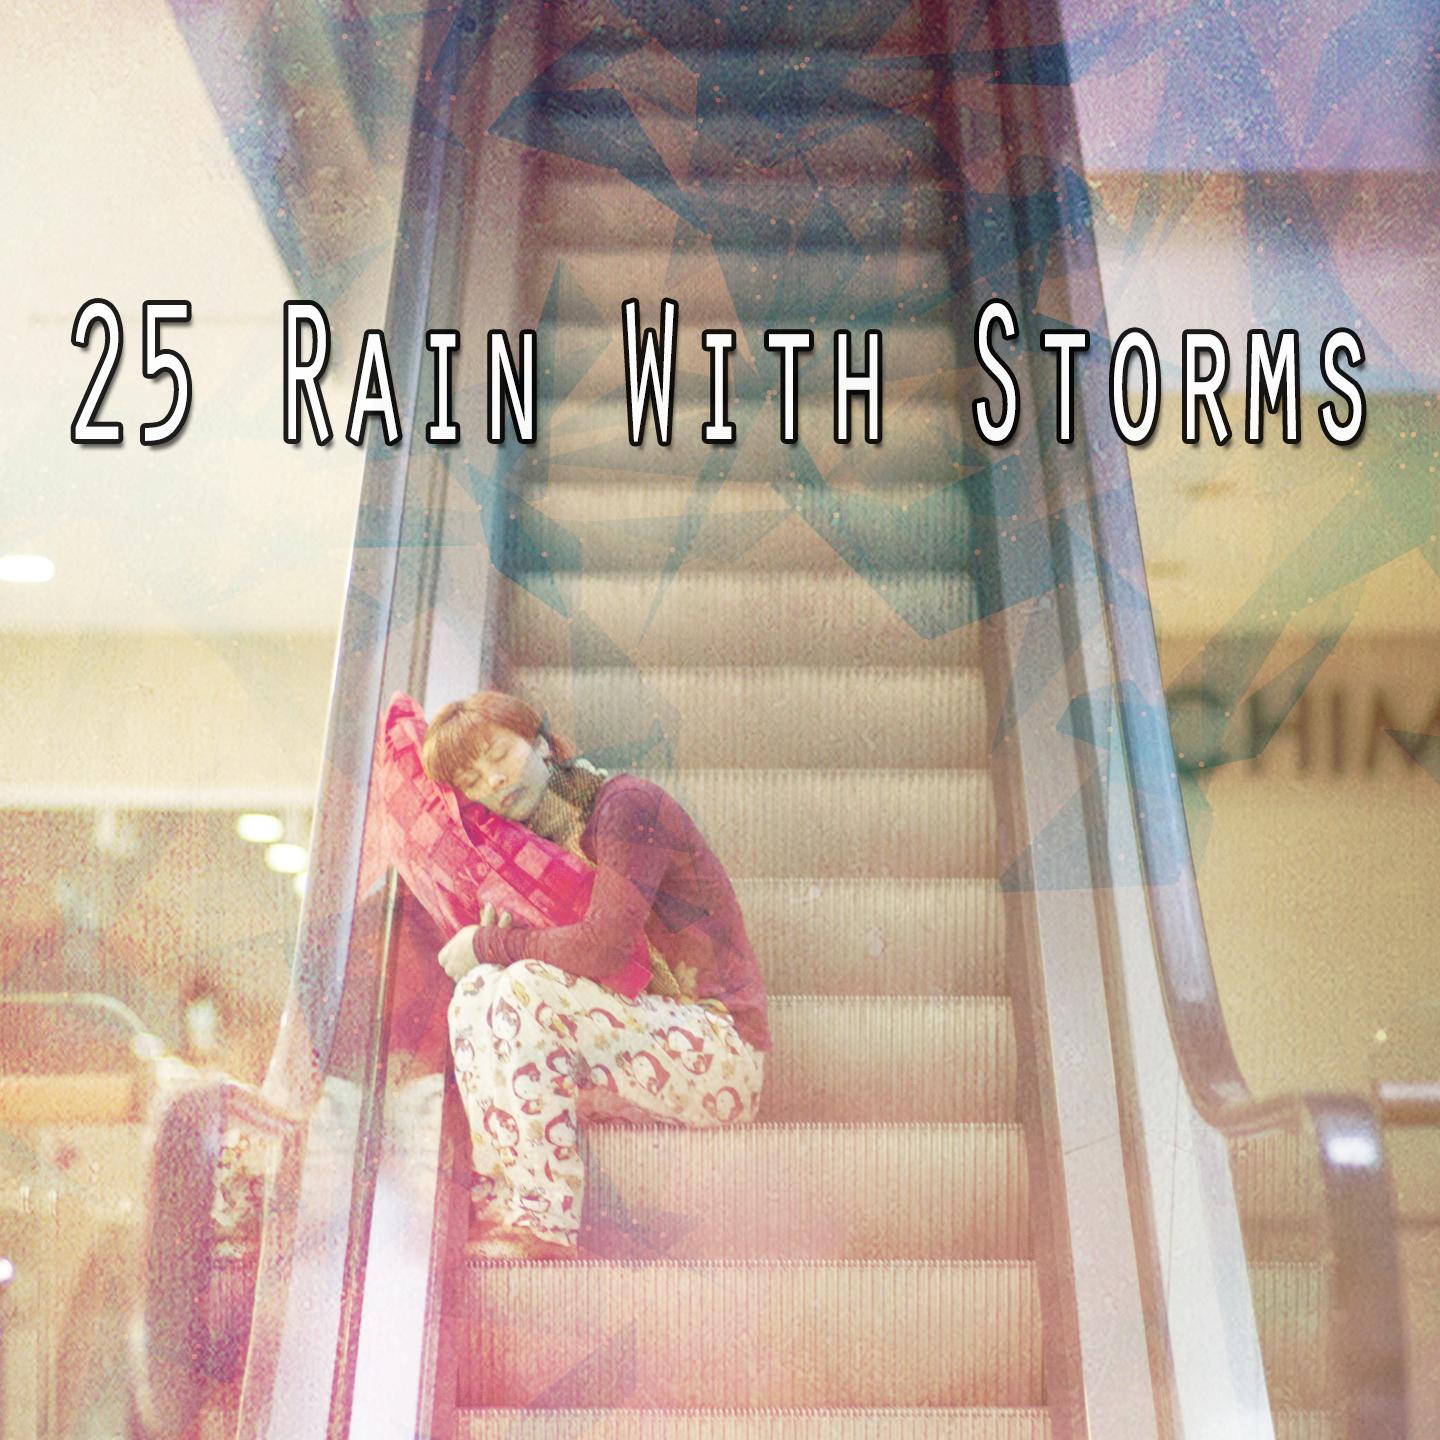 25 Rain With Storms